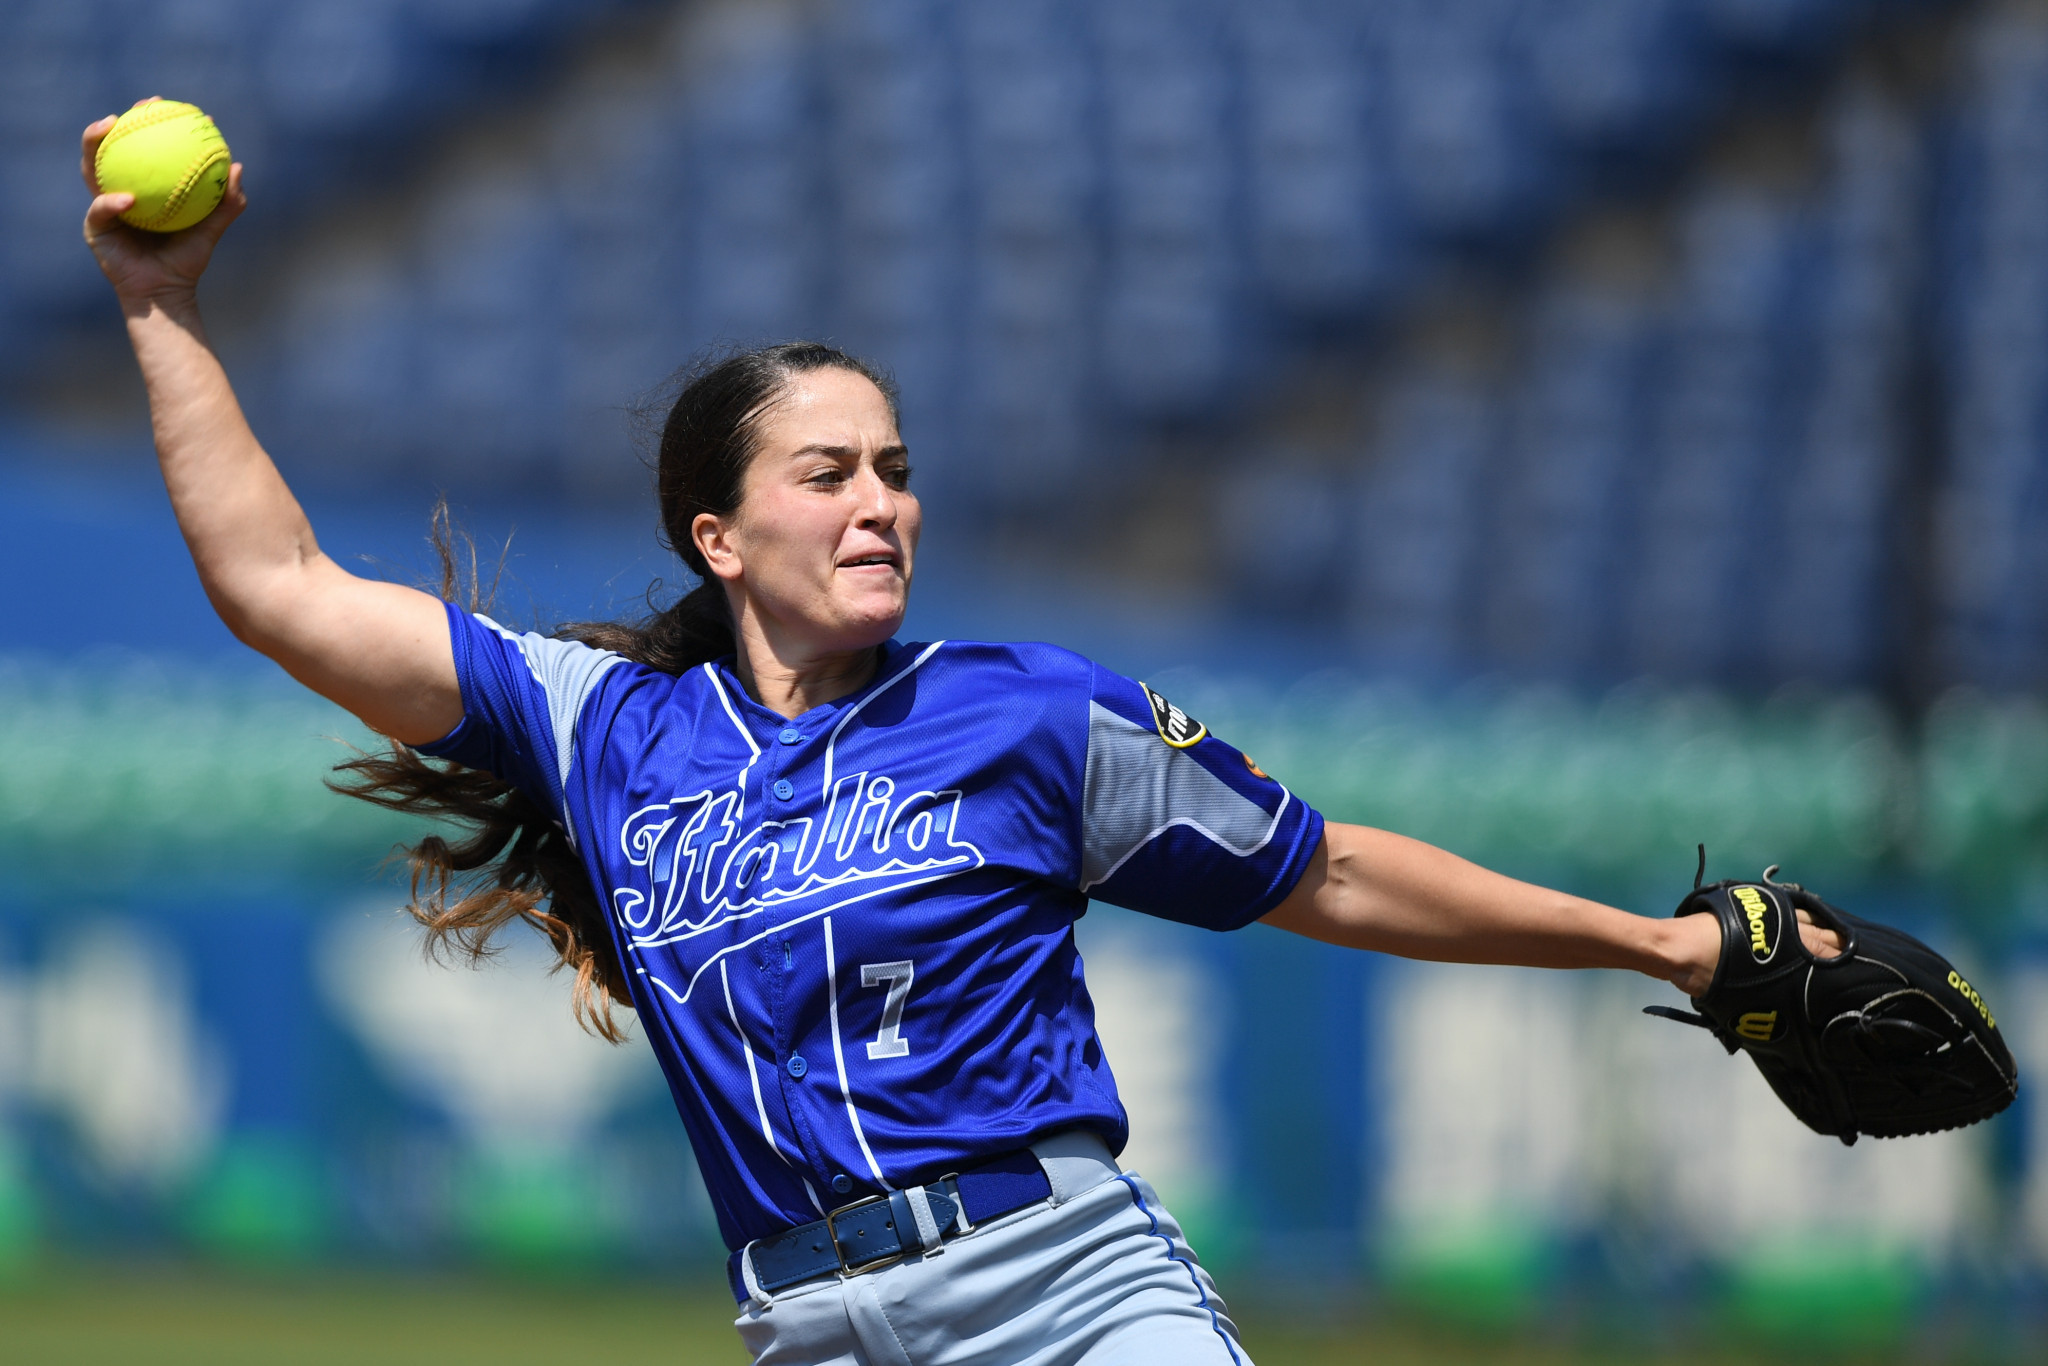 Italian softball team to attend pre-Olympics training camp in December